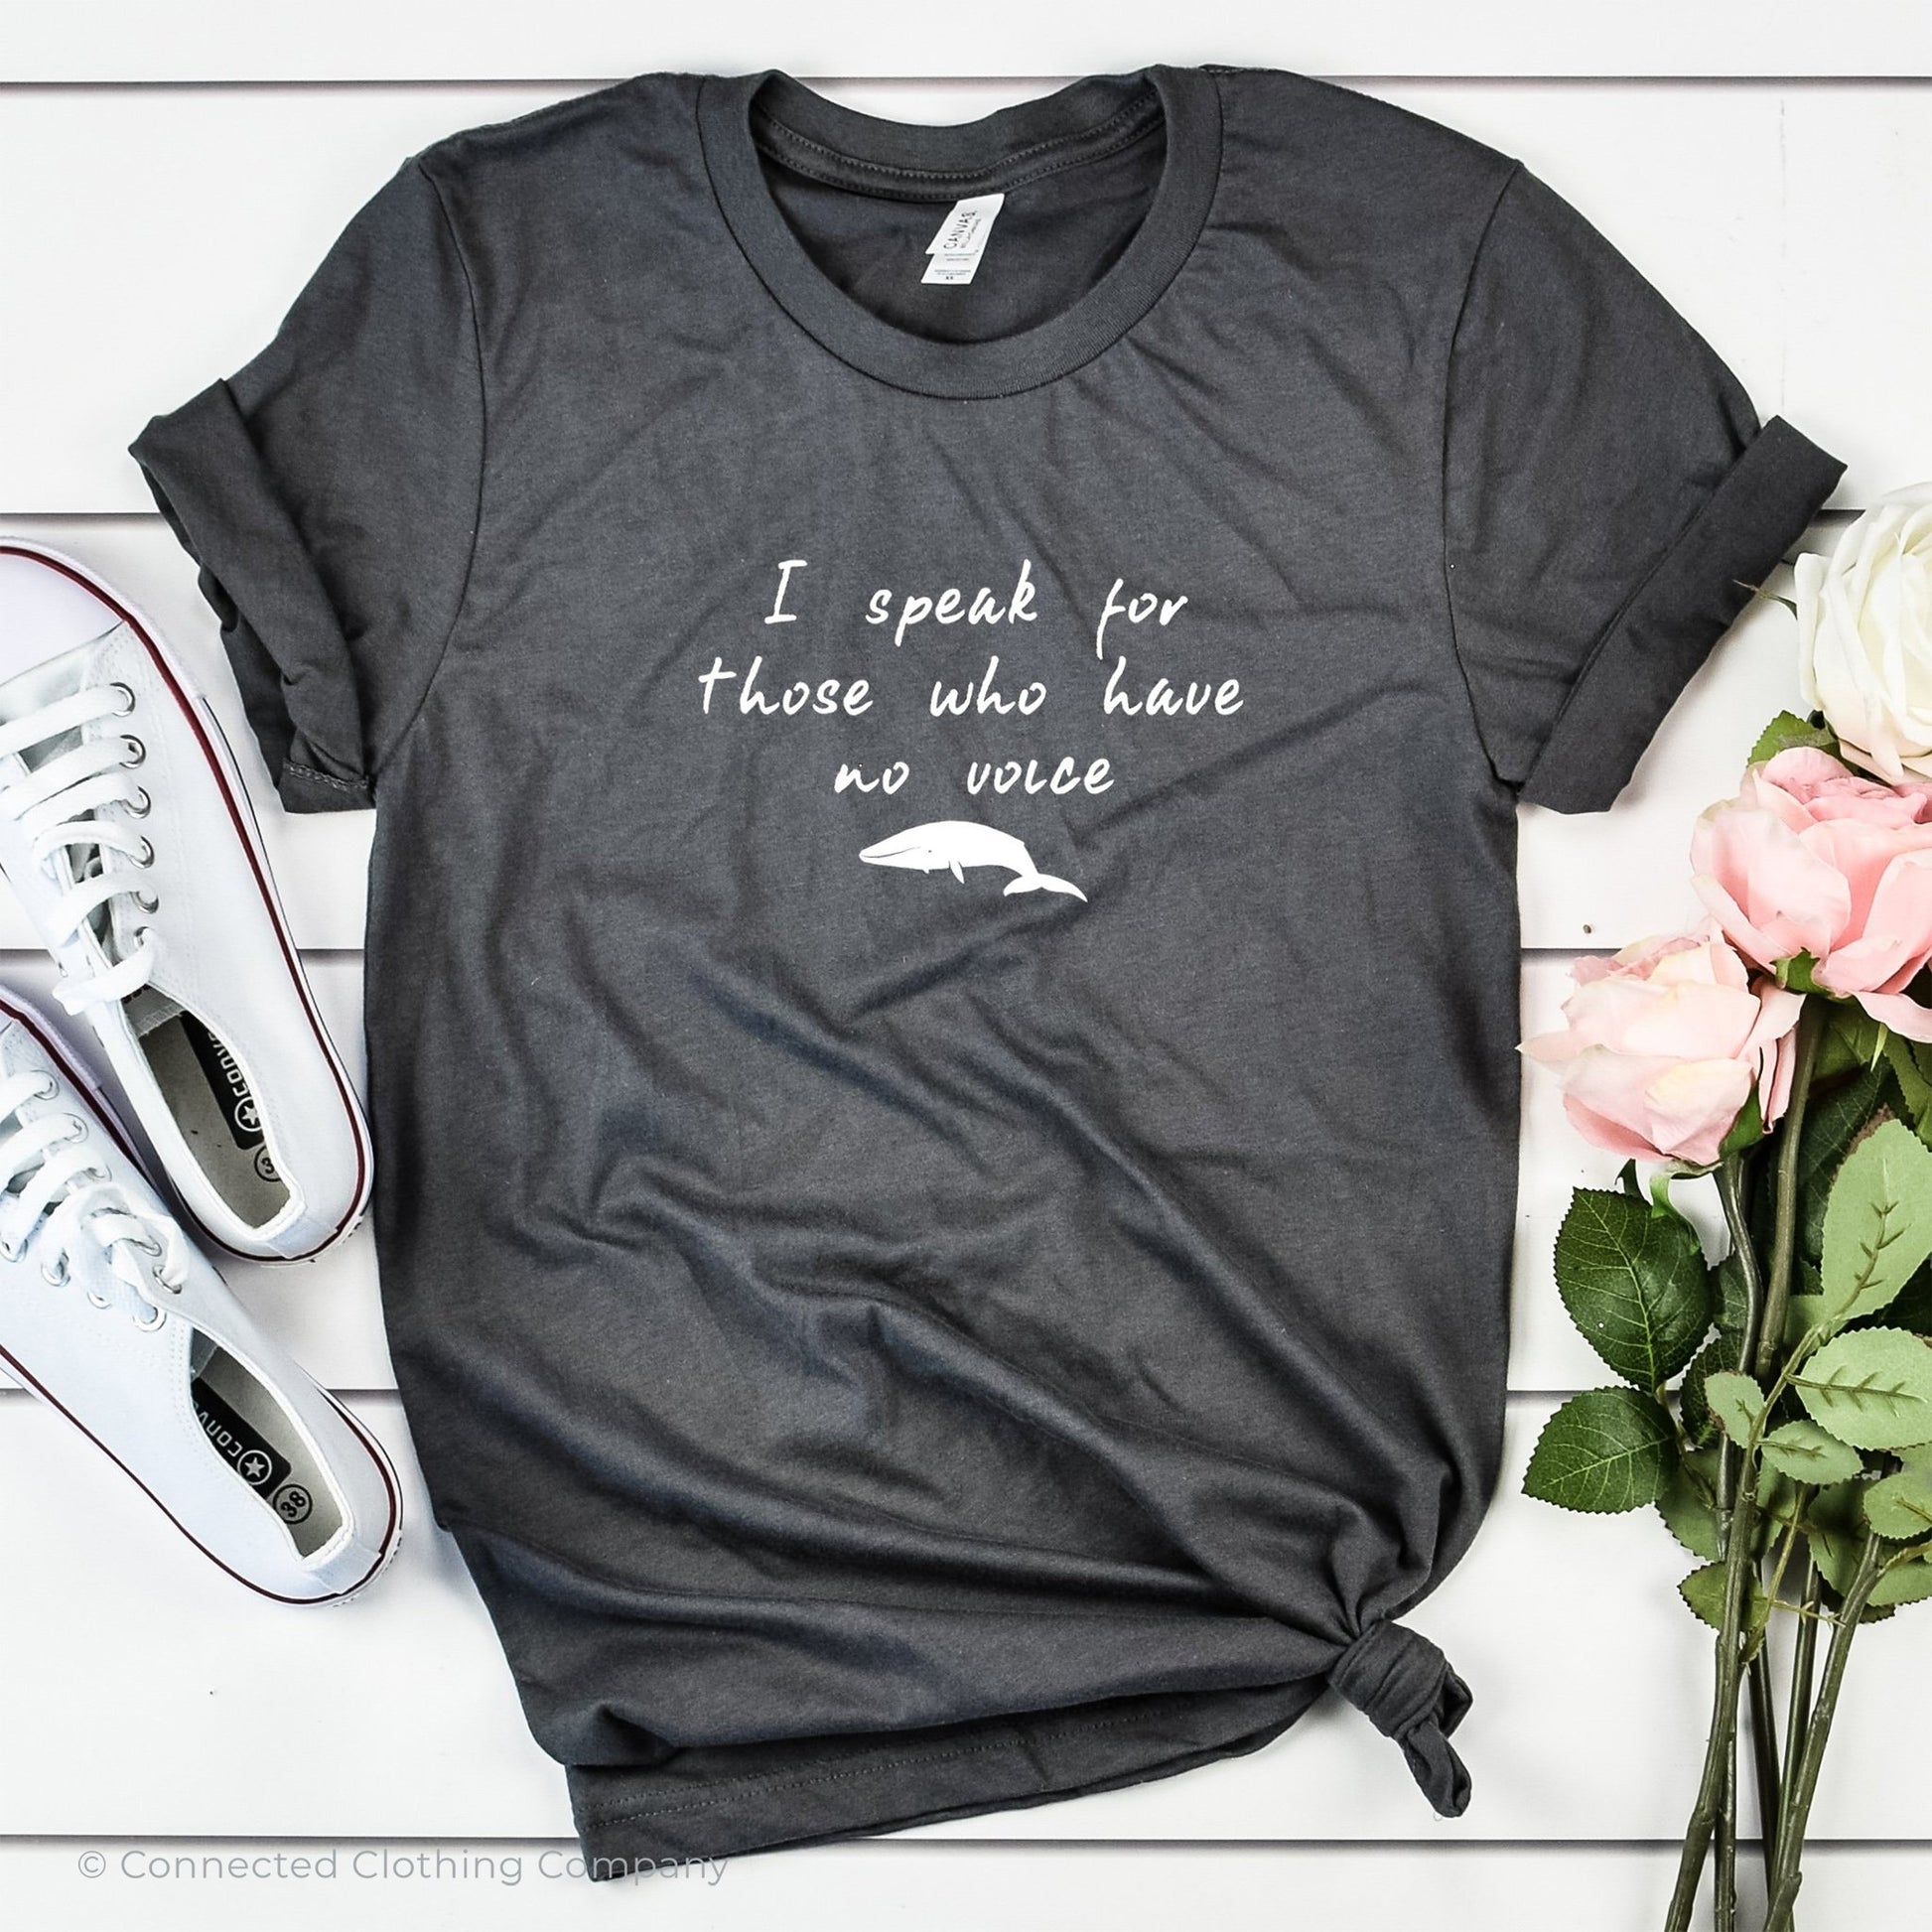 Be The Voice Whale Unisex Short-Sleeve Tee in Asphalt - Connected Clothing Company donates 10% of the profits from this t-shirt to Mission Blue ocean conservation